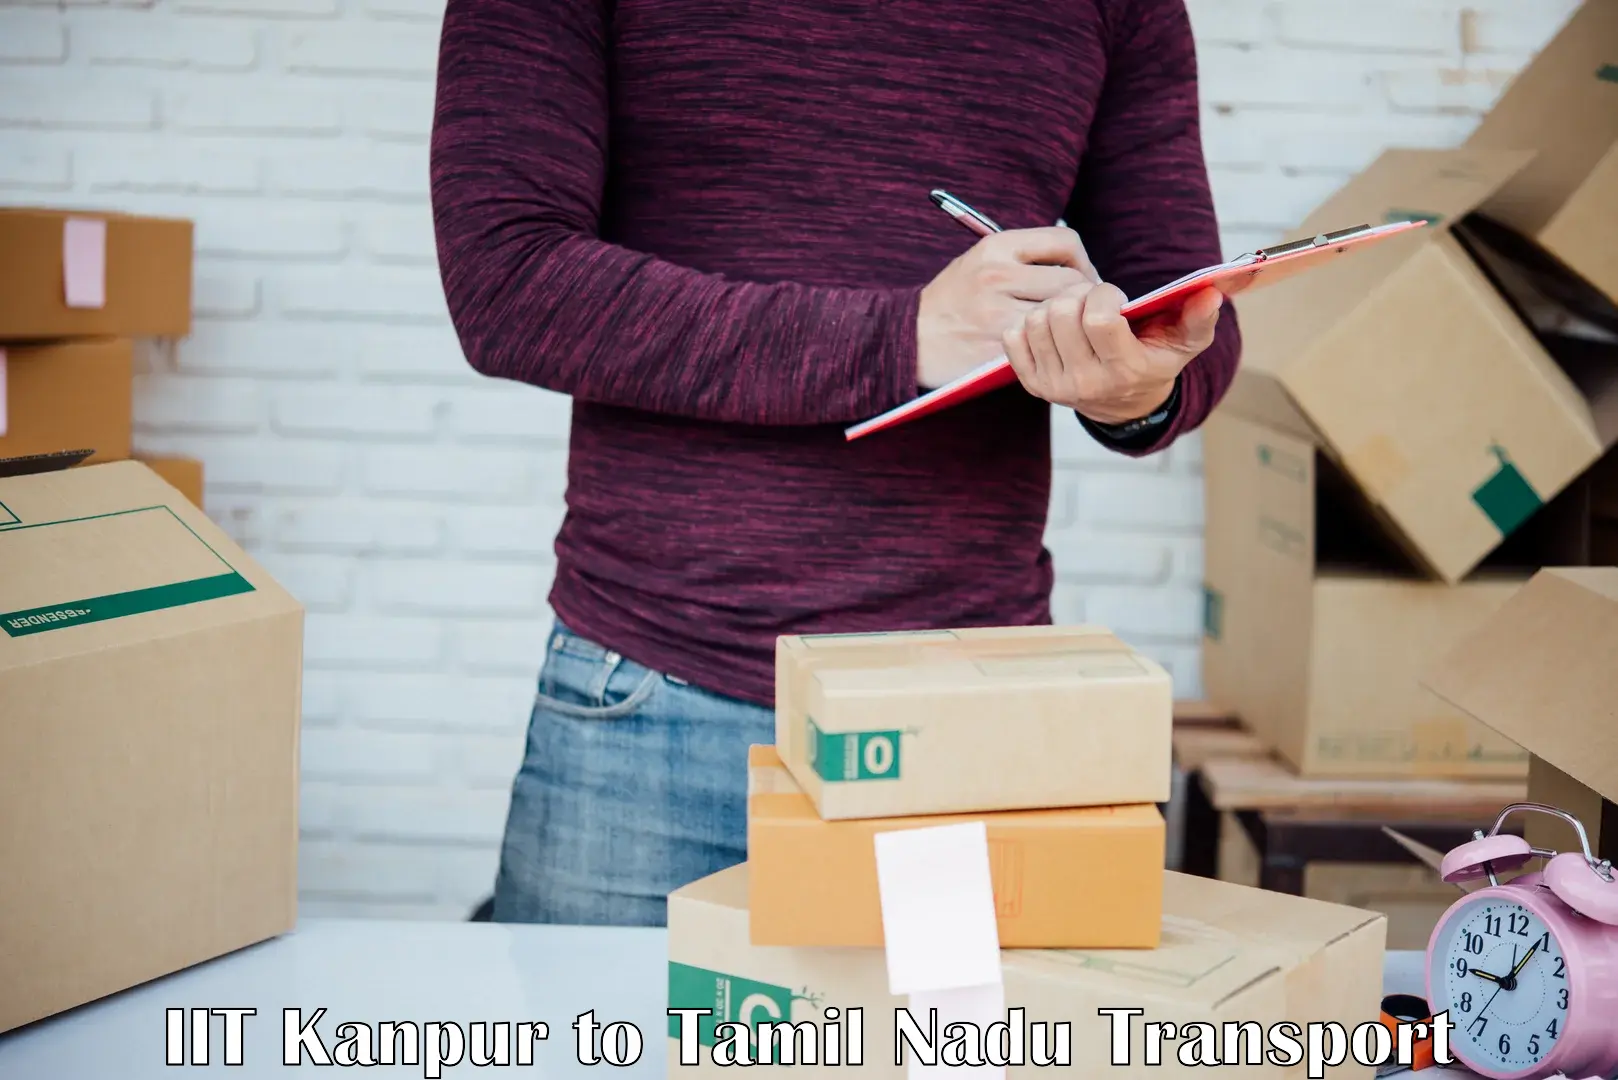 Furniture transport service in IIT Kanpur to Omalur